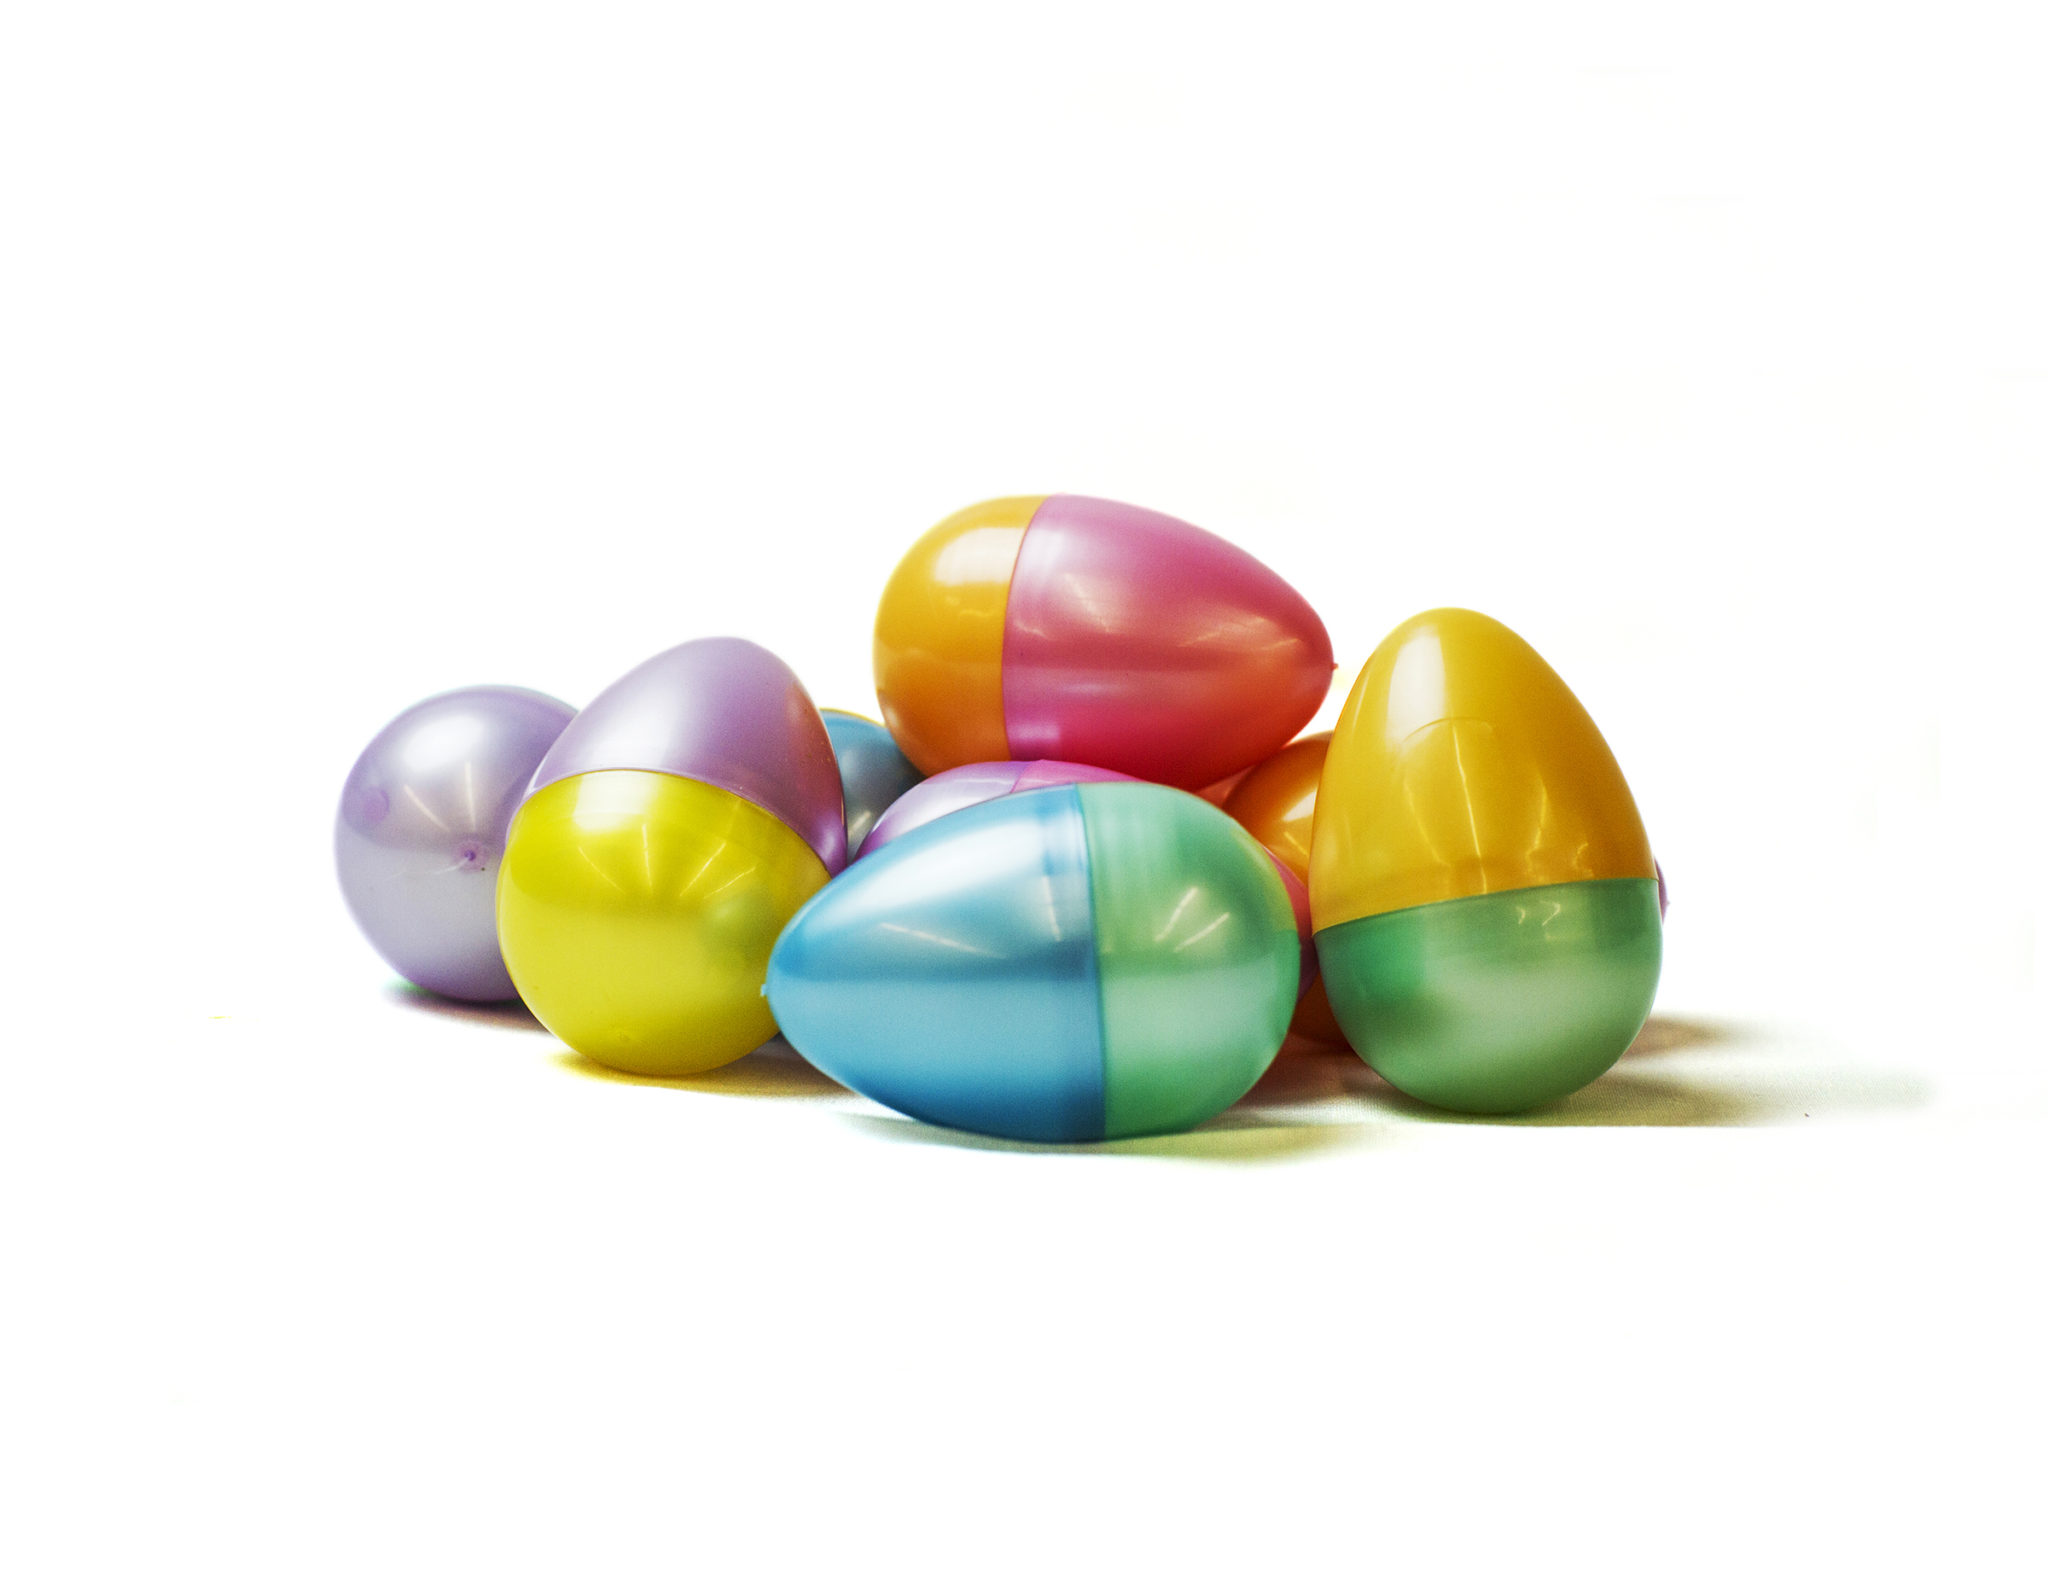 The best Easter Eggs on the Internet - National